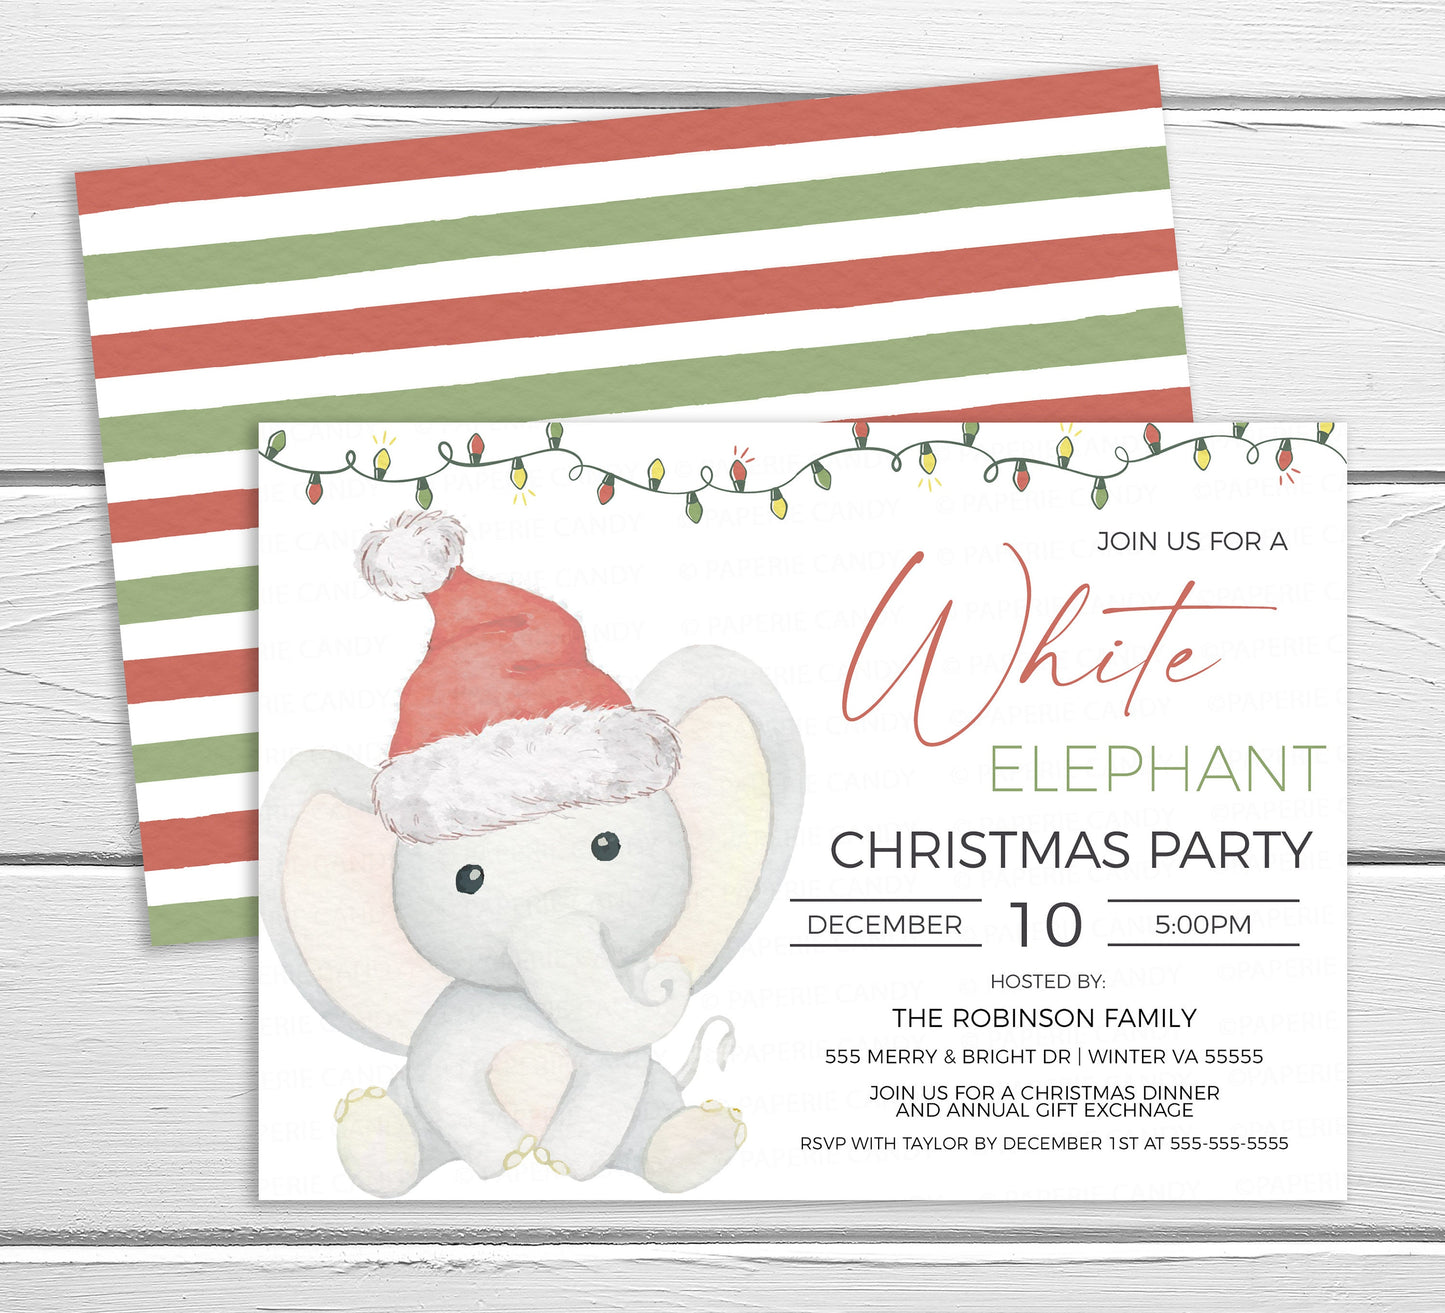 White Elephant Party Invitation, Gift Exchange Invite, Friends Family Business Company Staff Employee Work Party Editable Printable Template